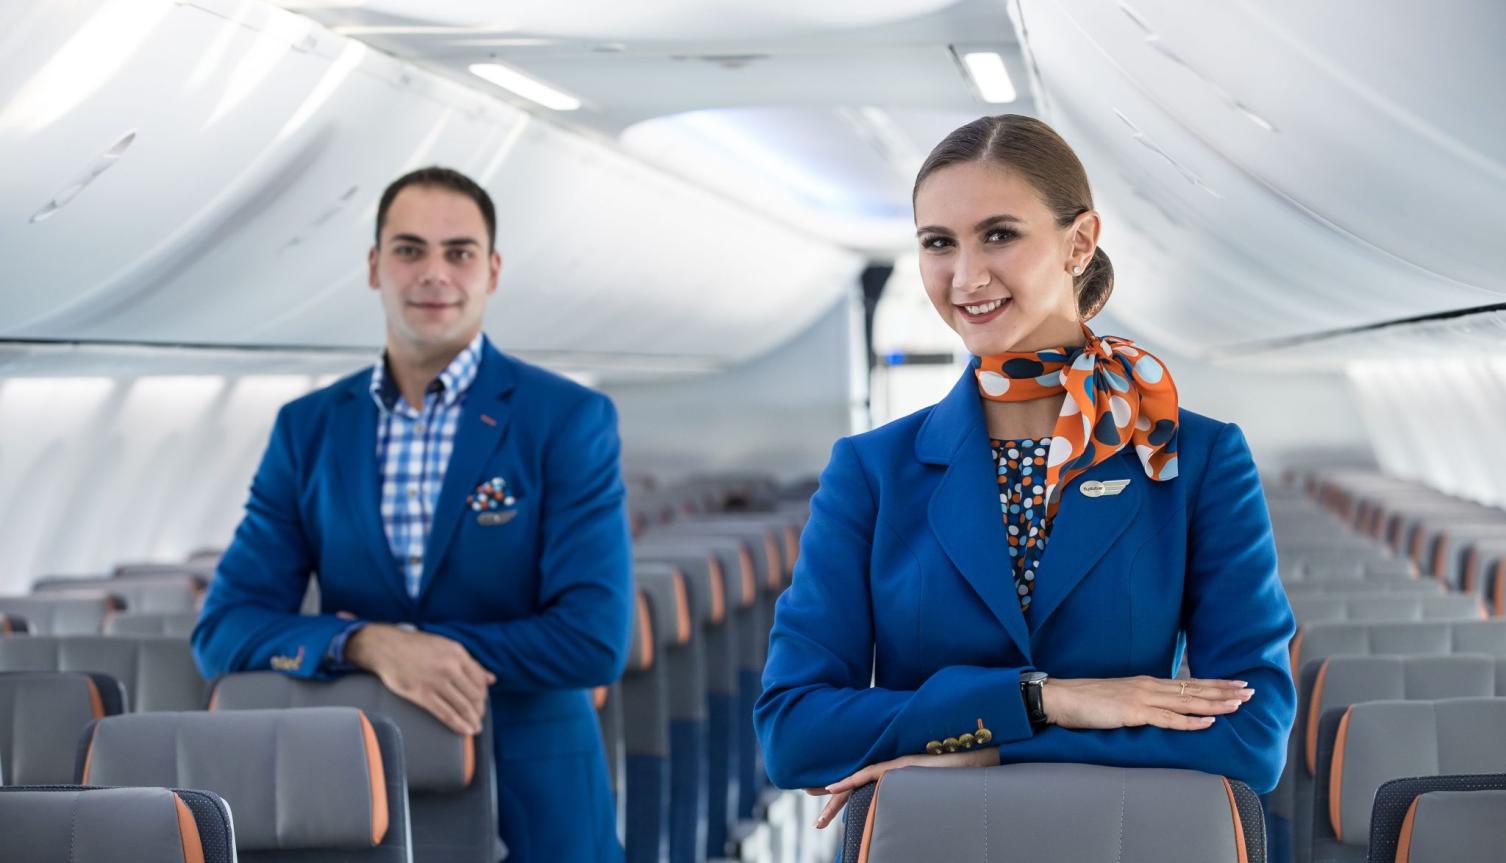 Navigating the Skies: A Day in the Life of a Flight Attendant